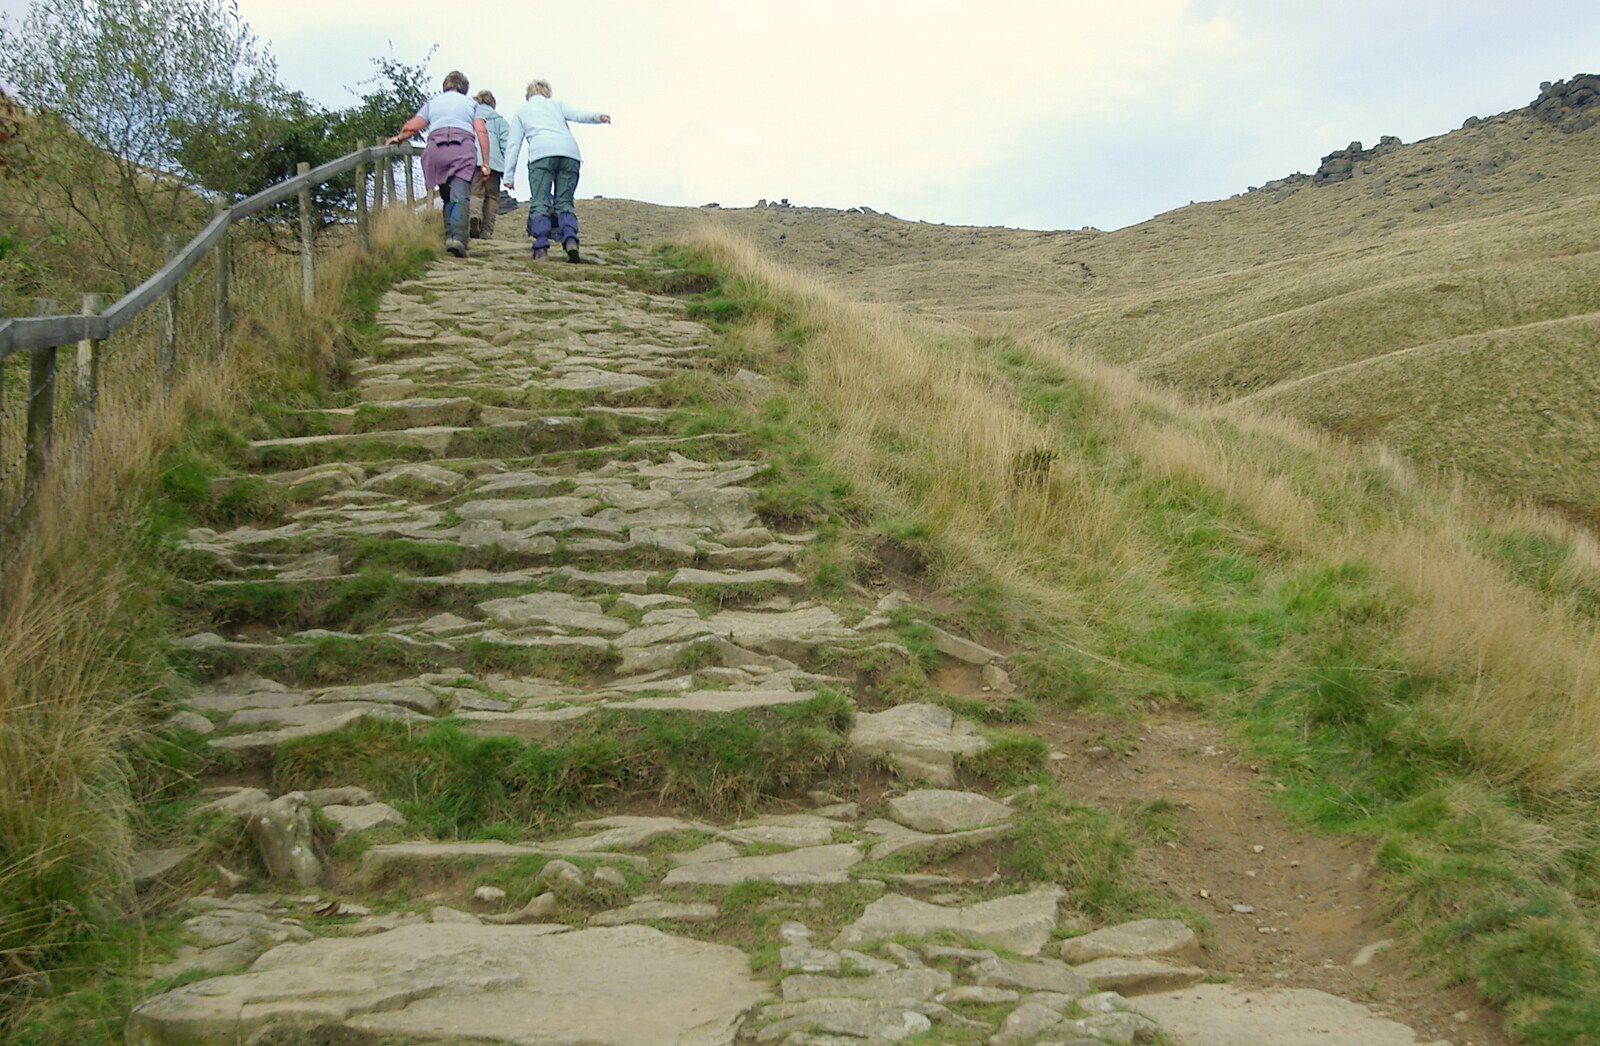 Climbing Jacob's Ladder from The Pennine Way: Lost on Kinder Scout, Derbyshire - 9th October 2005